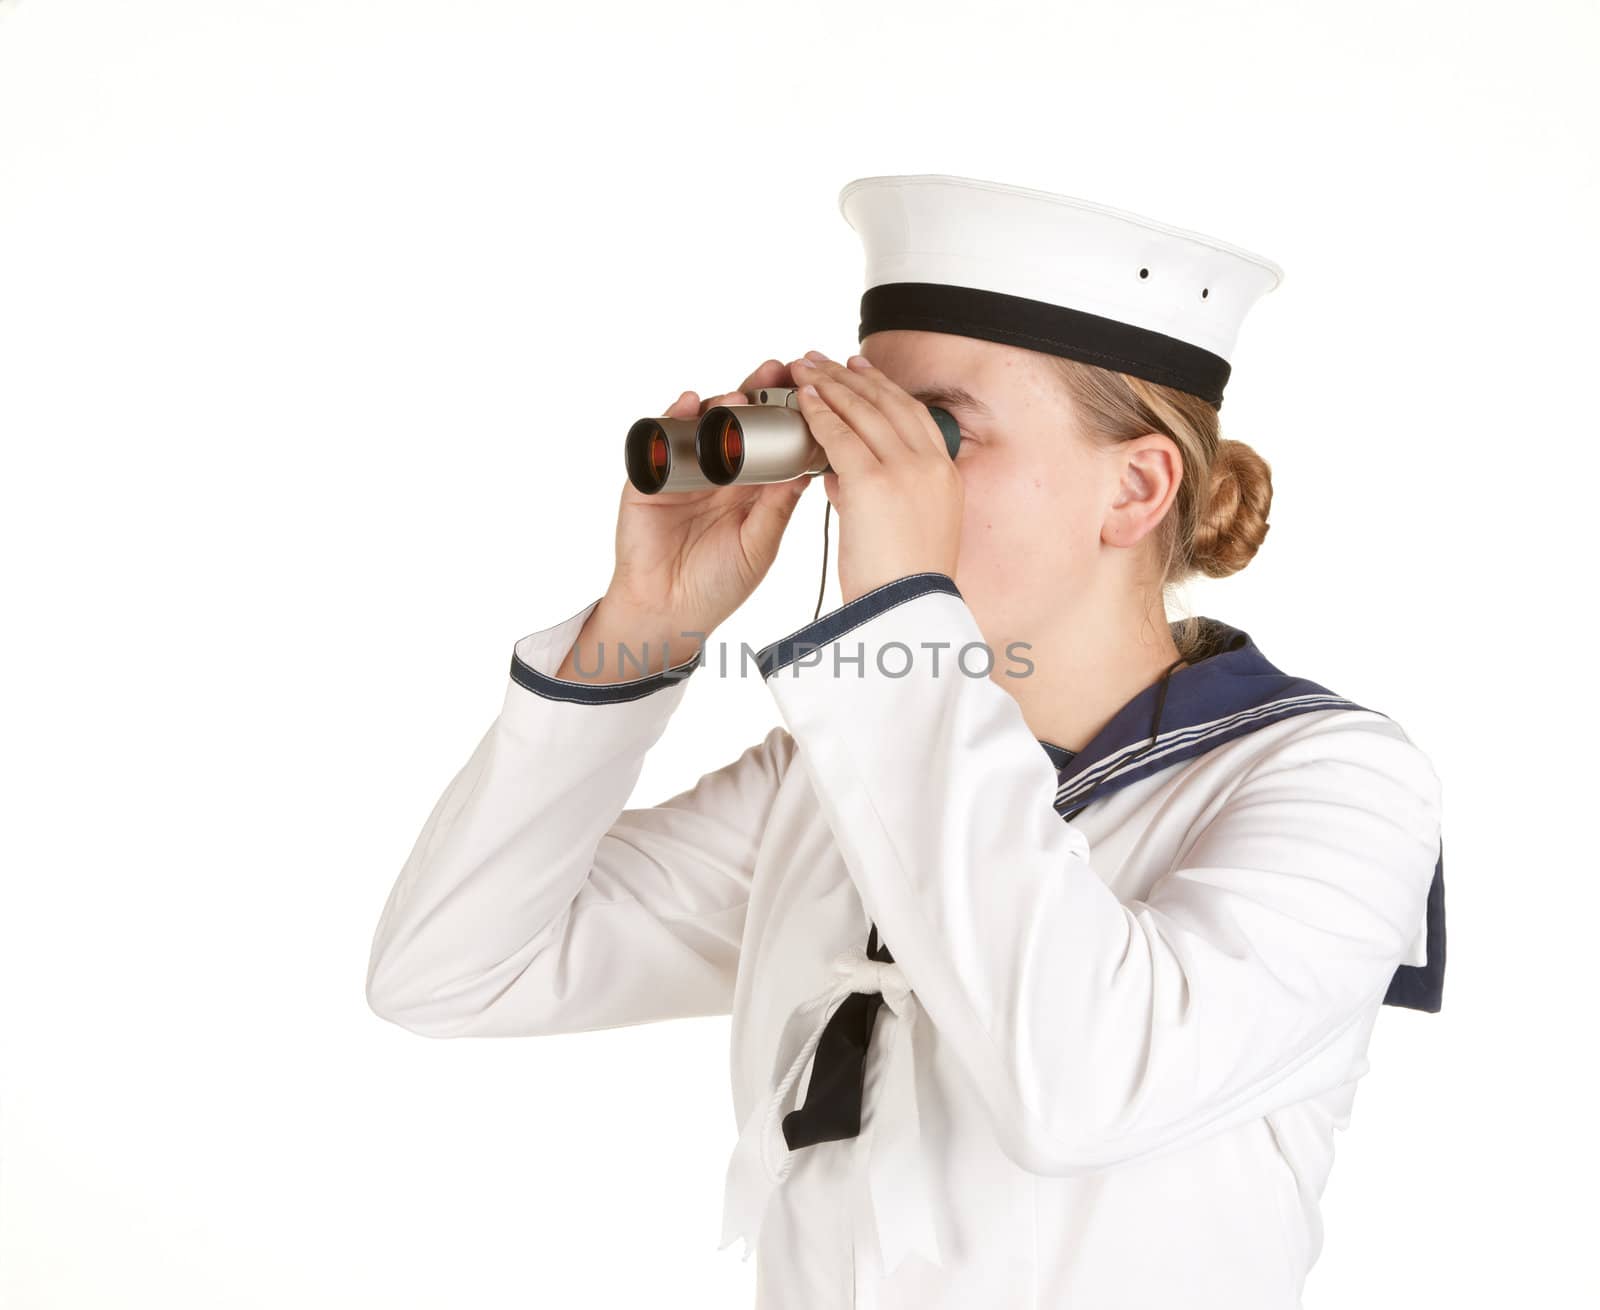 navy seaman with binoculars by clearviewstock